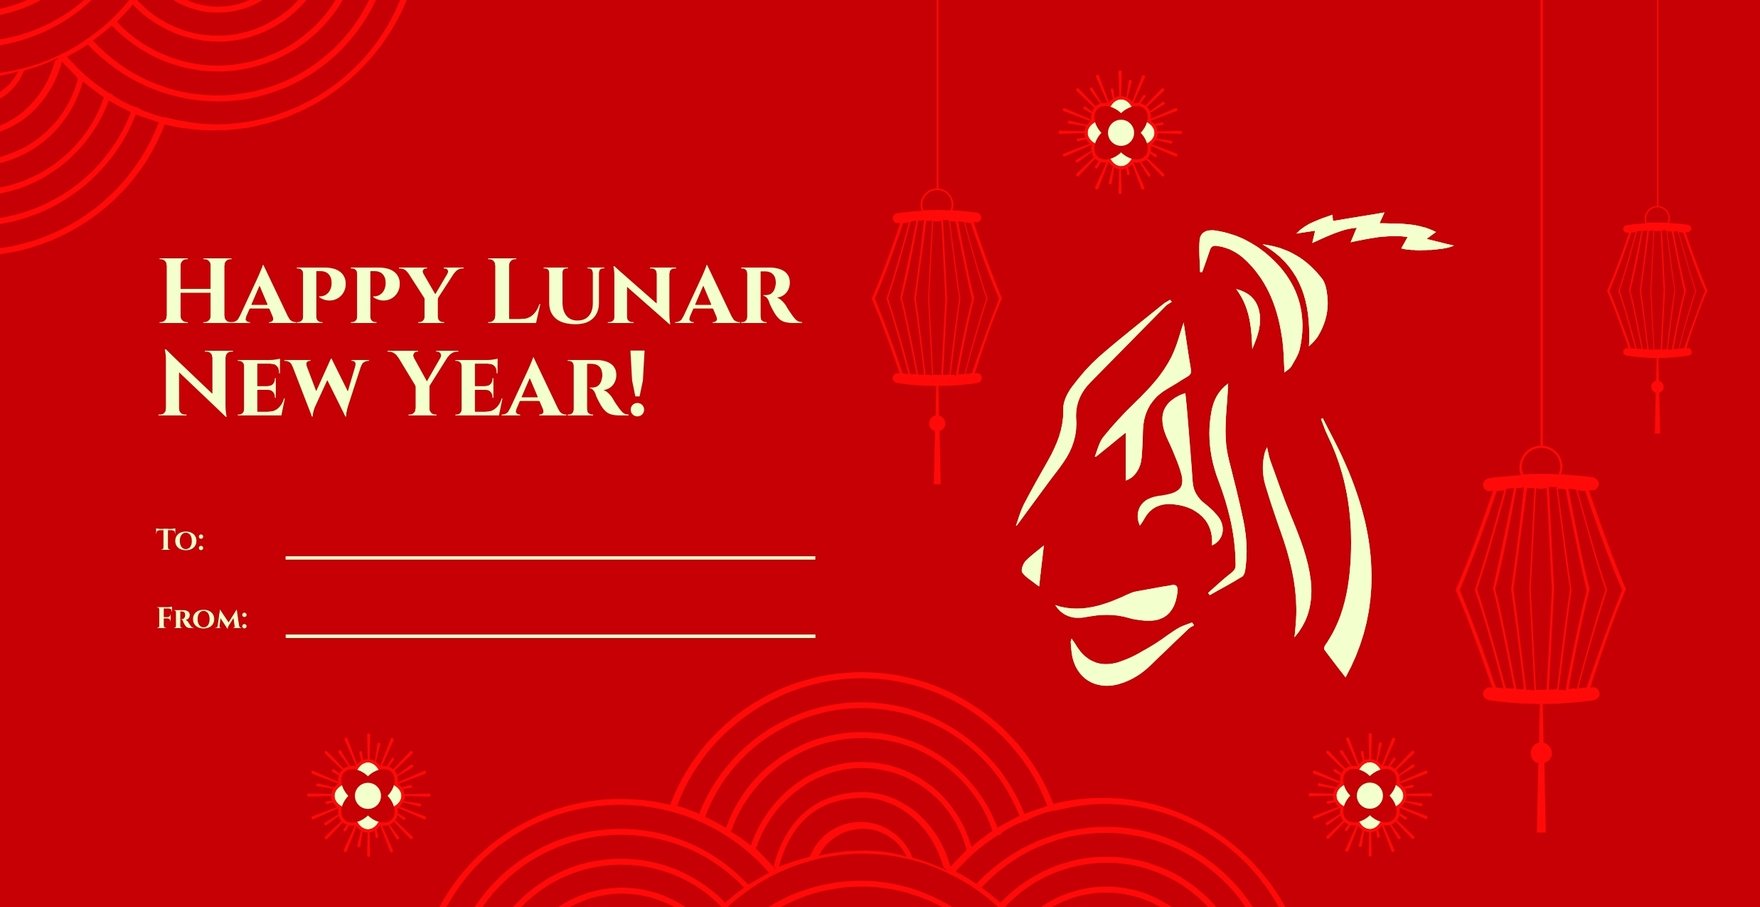 FREE Lunar New Year Card Templates & Examples Edit Online & Download